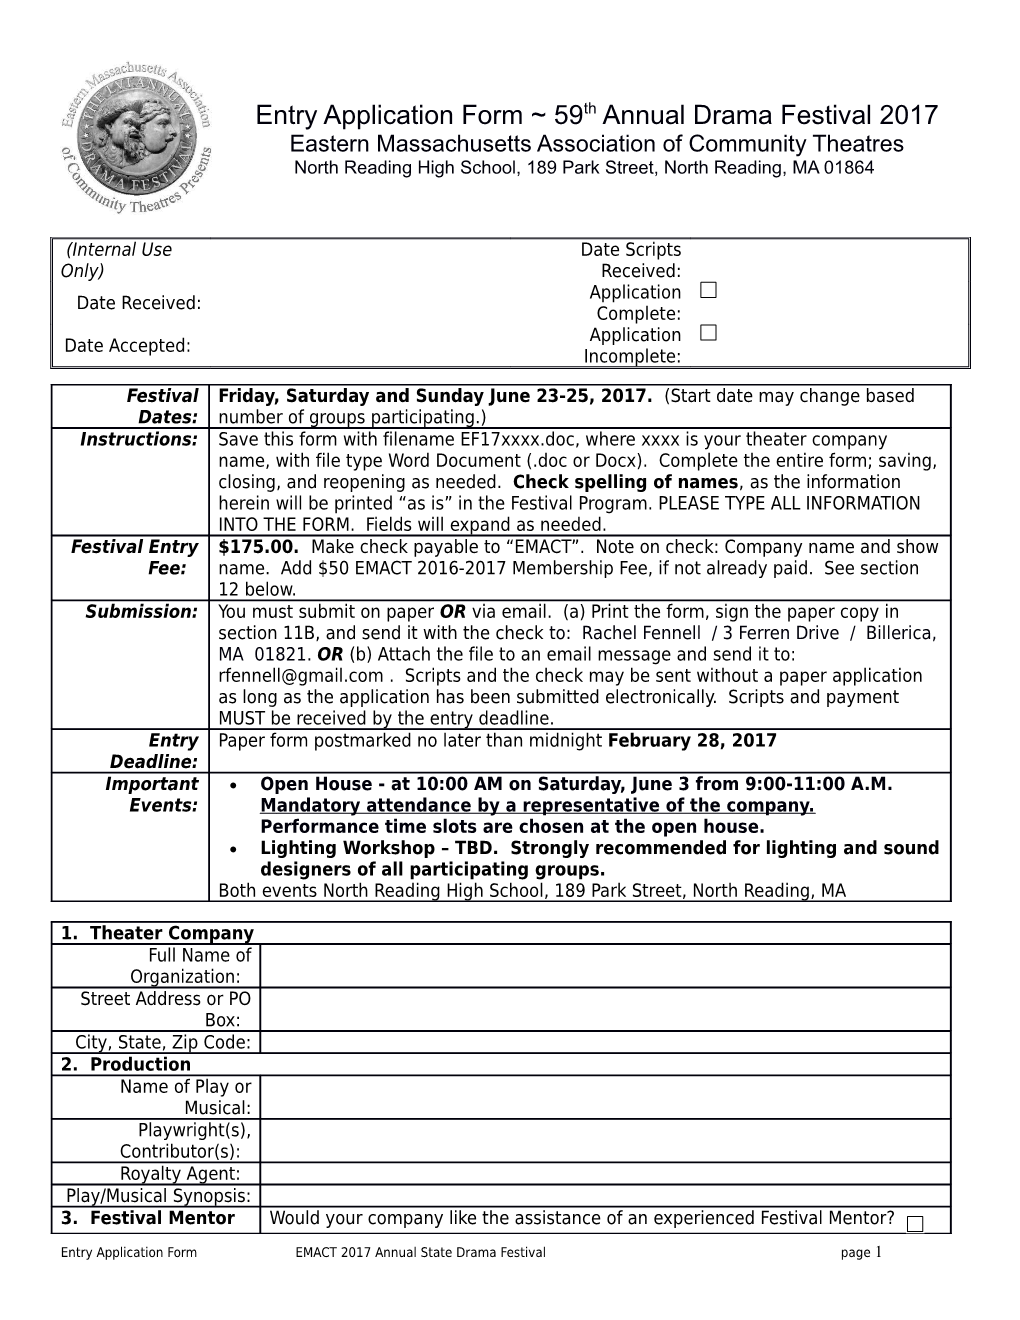 Entry Application Formemact 2017 Annual State Drama Festivalpage 1